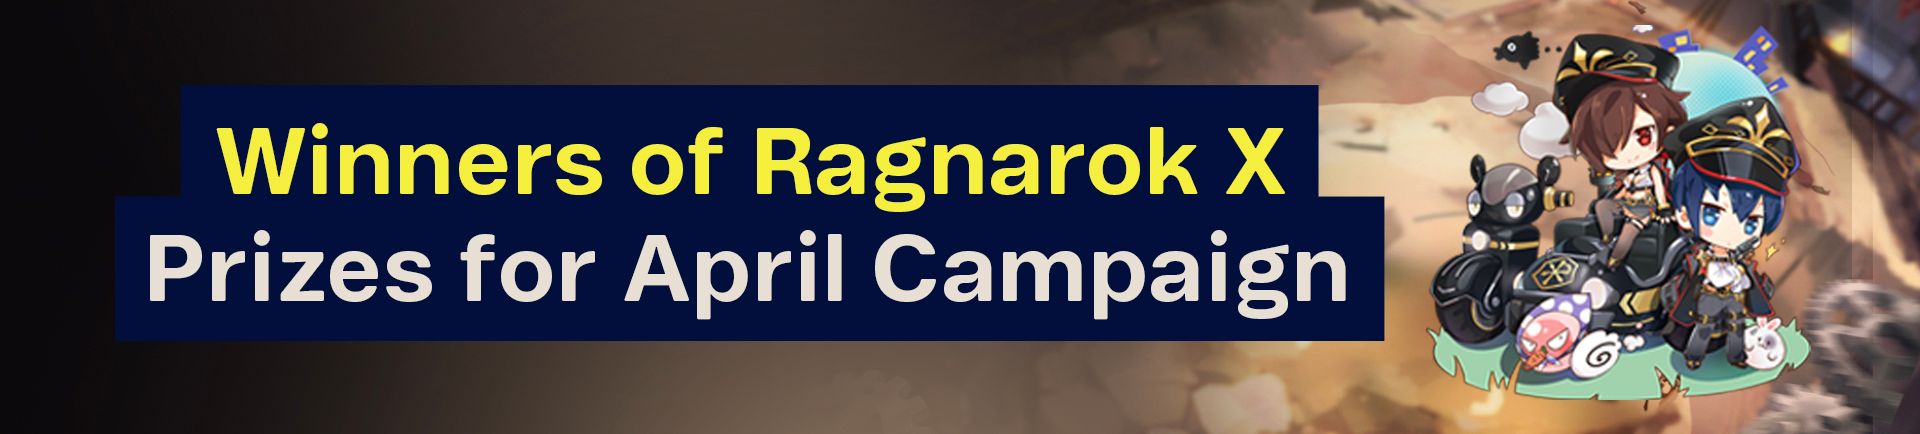 Announcement: Winners of Ragnarok X Prizes for April Campaign